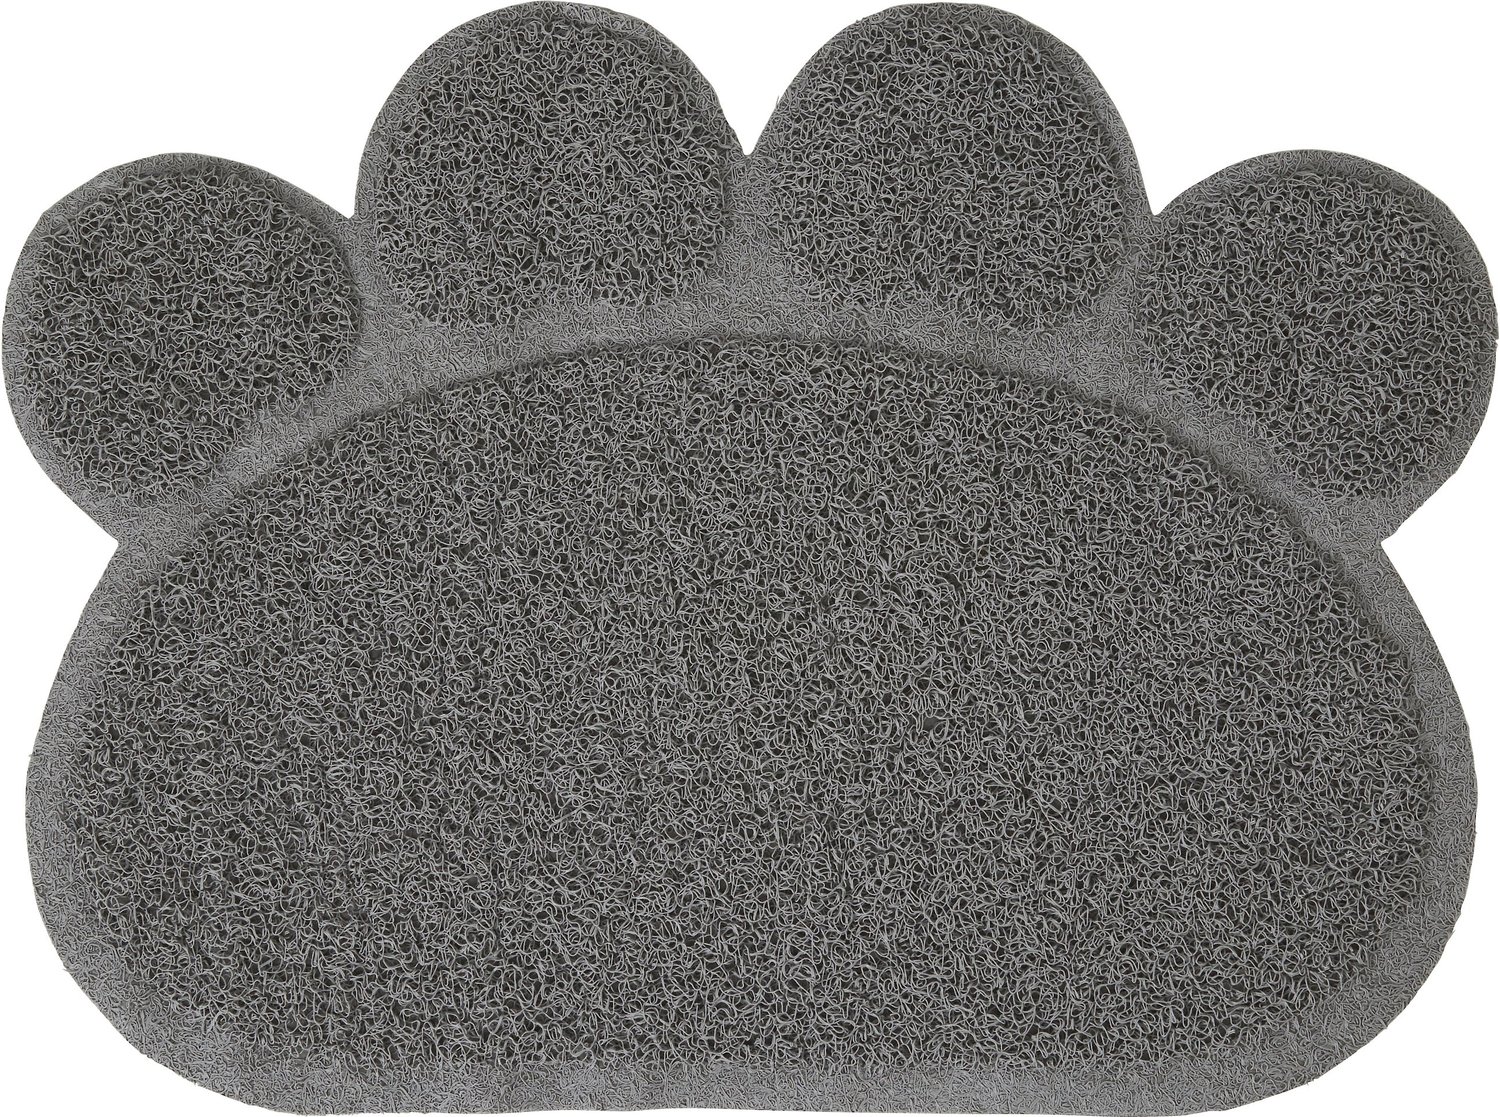 Paw-Shaped Large Cat Litter Mat,Kitty Litter Rug Doormat,23.5*17.75 Inches,7 Colors Available Coffee